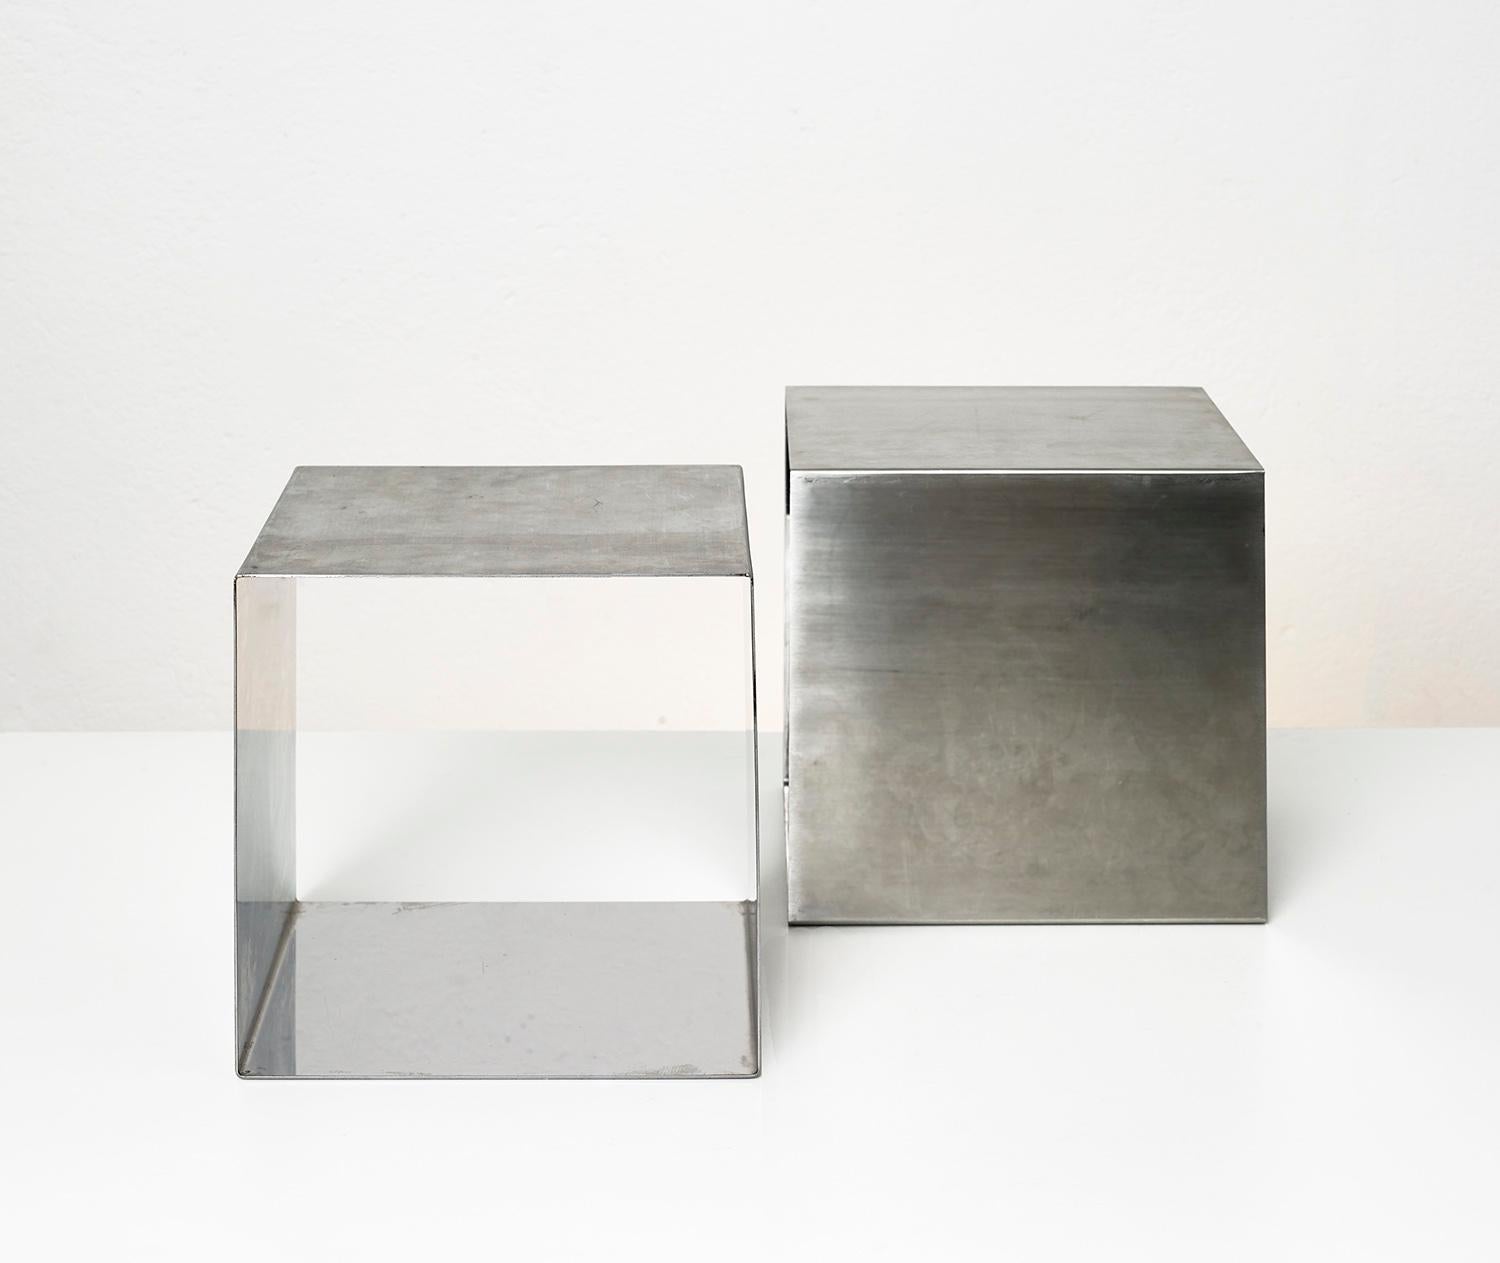 Pair of stainless steel cube tables by Maria Pergay for design steel, France, 1968.

Rare pair of stainless steel cube tables by famous French designer and interior designer Maria Pergay for Design Steel, France, 1968.

The four exterior faces